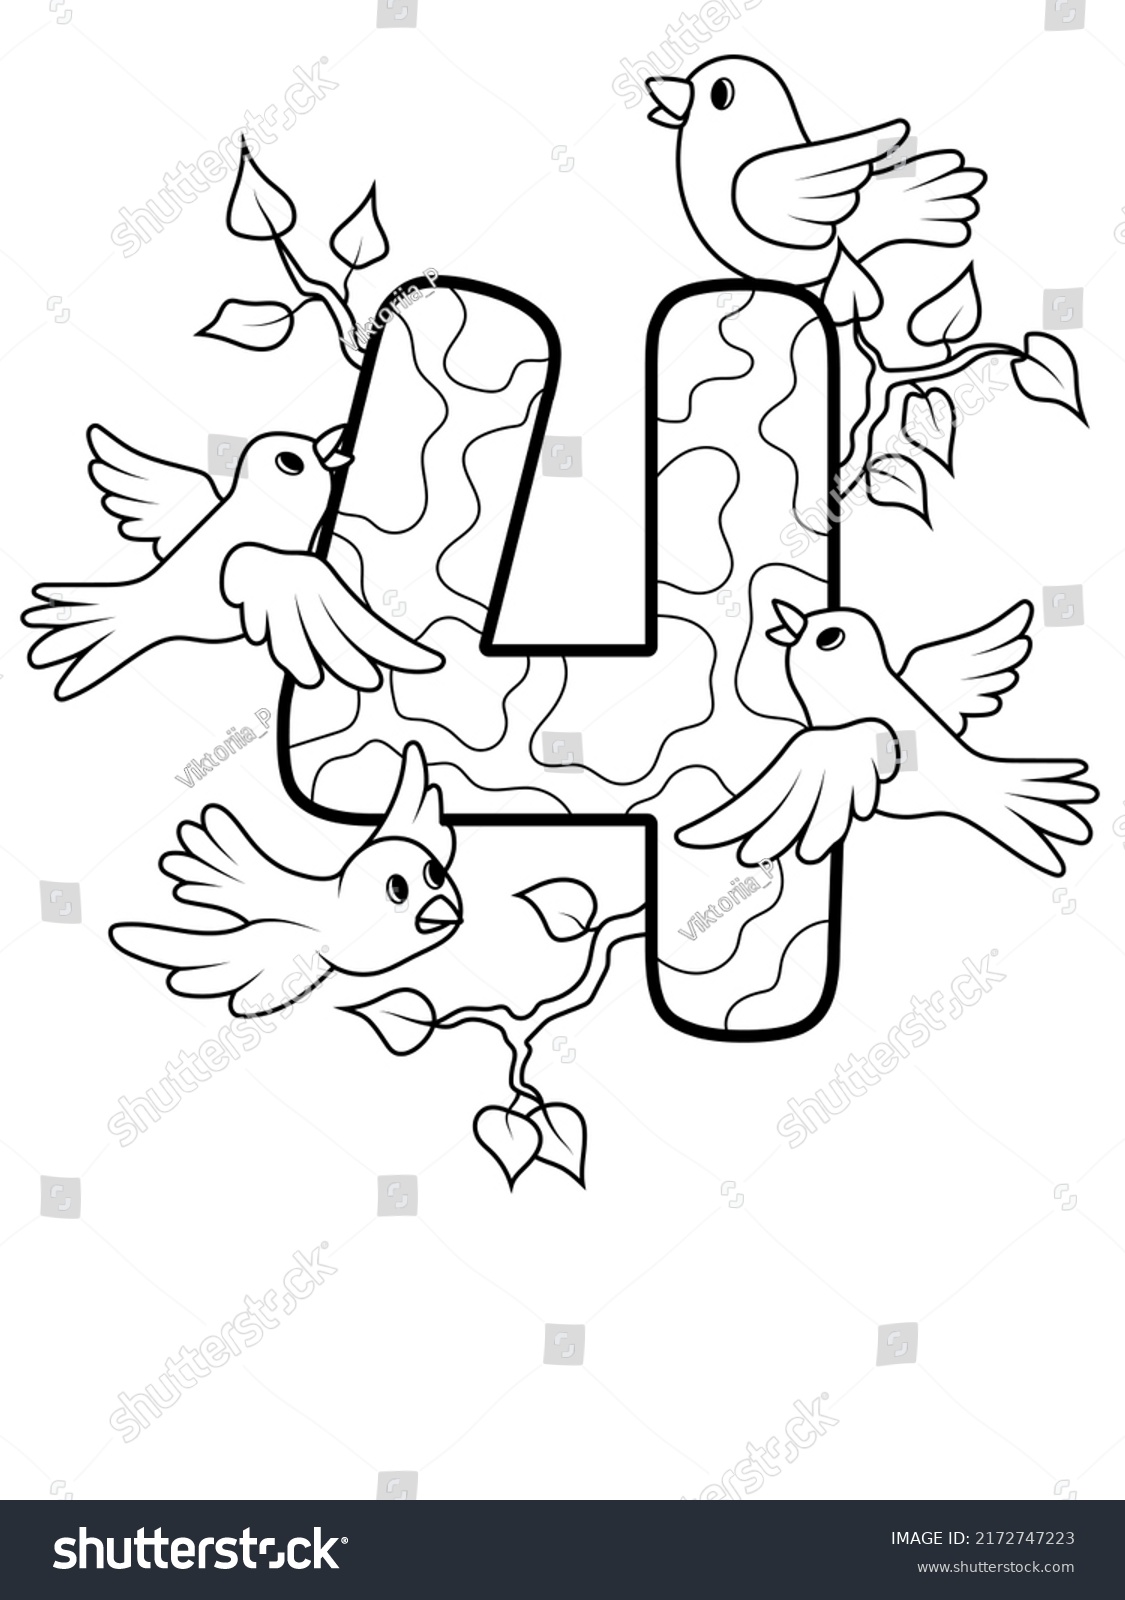 SVG of Coloring page - Numbers. Education and fun for childrens. Printable sheet - 4 four and birds svg